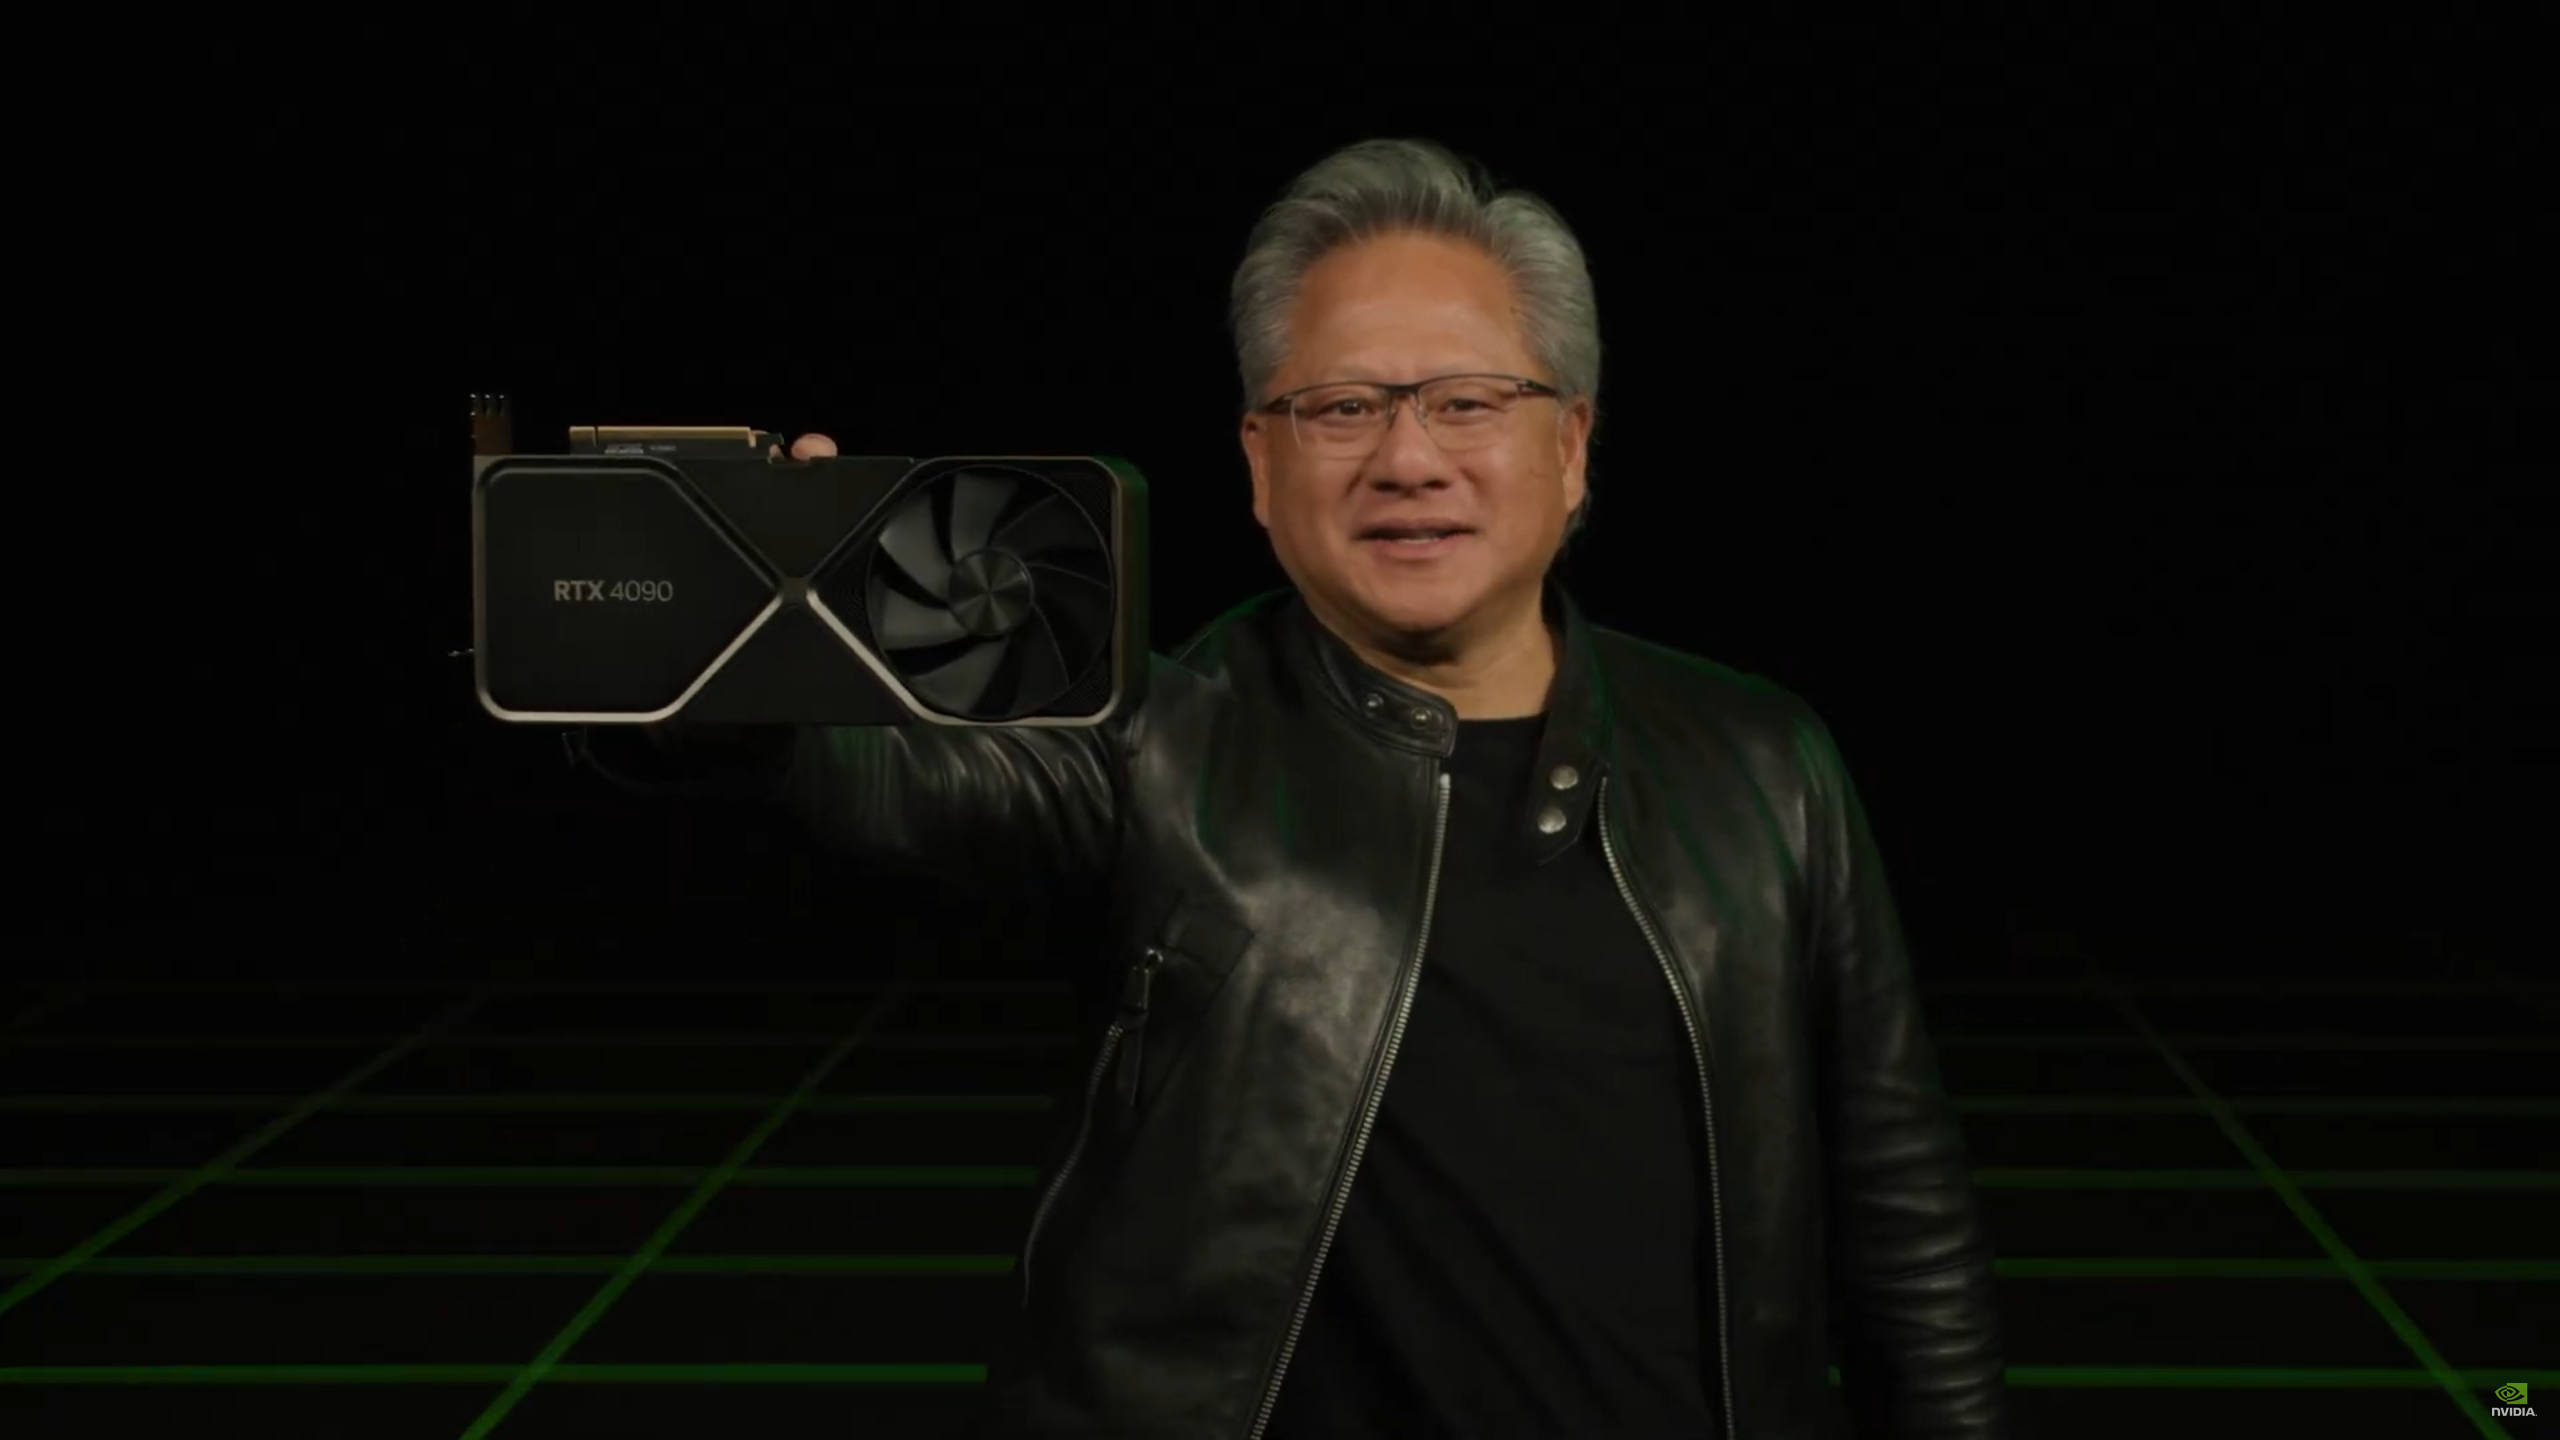 Nvidia CEO Jensen Huang holding up a GeForce RTX 4090 Founders Edition.